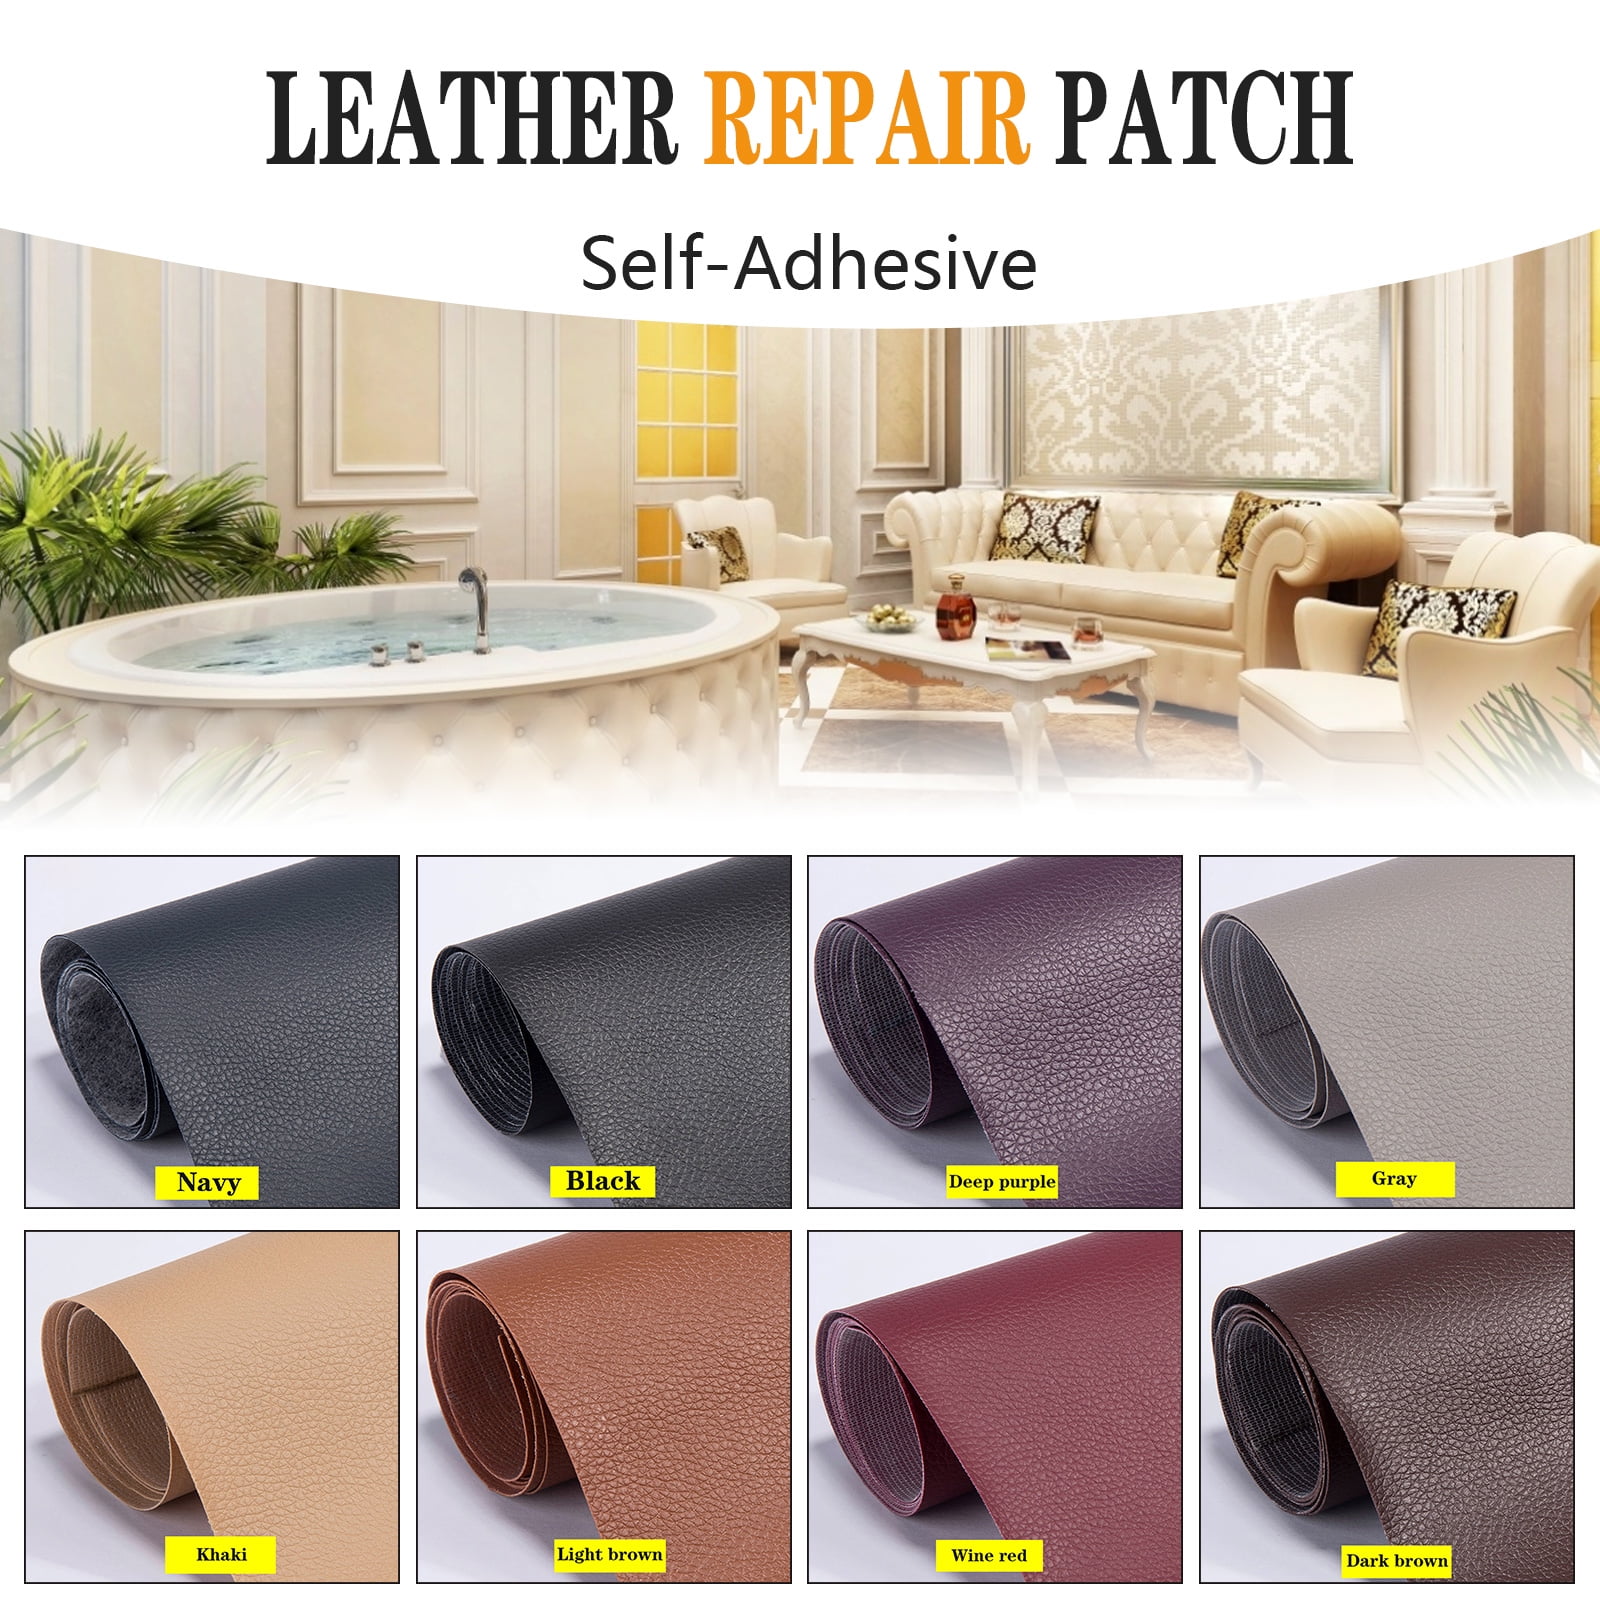 Self-Adhesive Artificial Leather Repair Patches PU Leather Fabric Stickers  for Leather Clothes Car Seats Bags Repair Sticky Tool - AliExpress